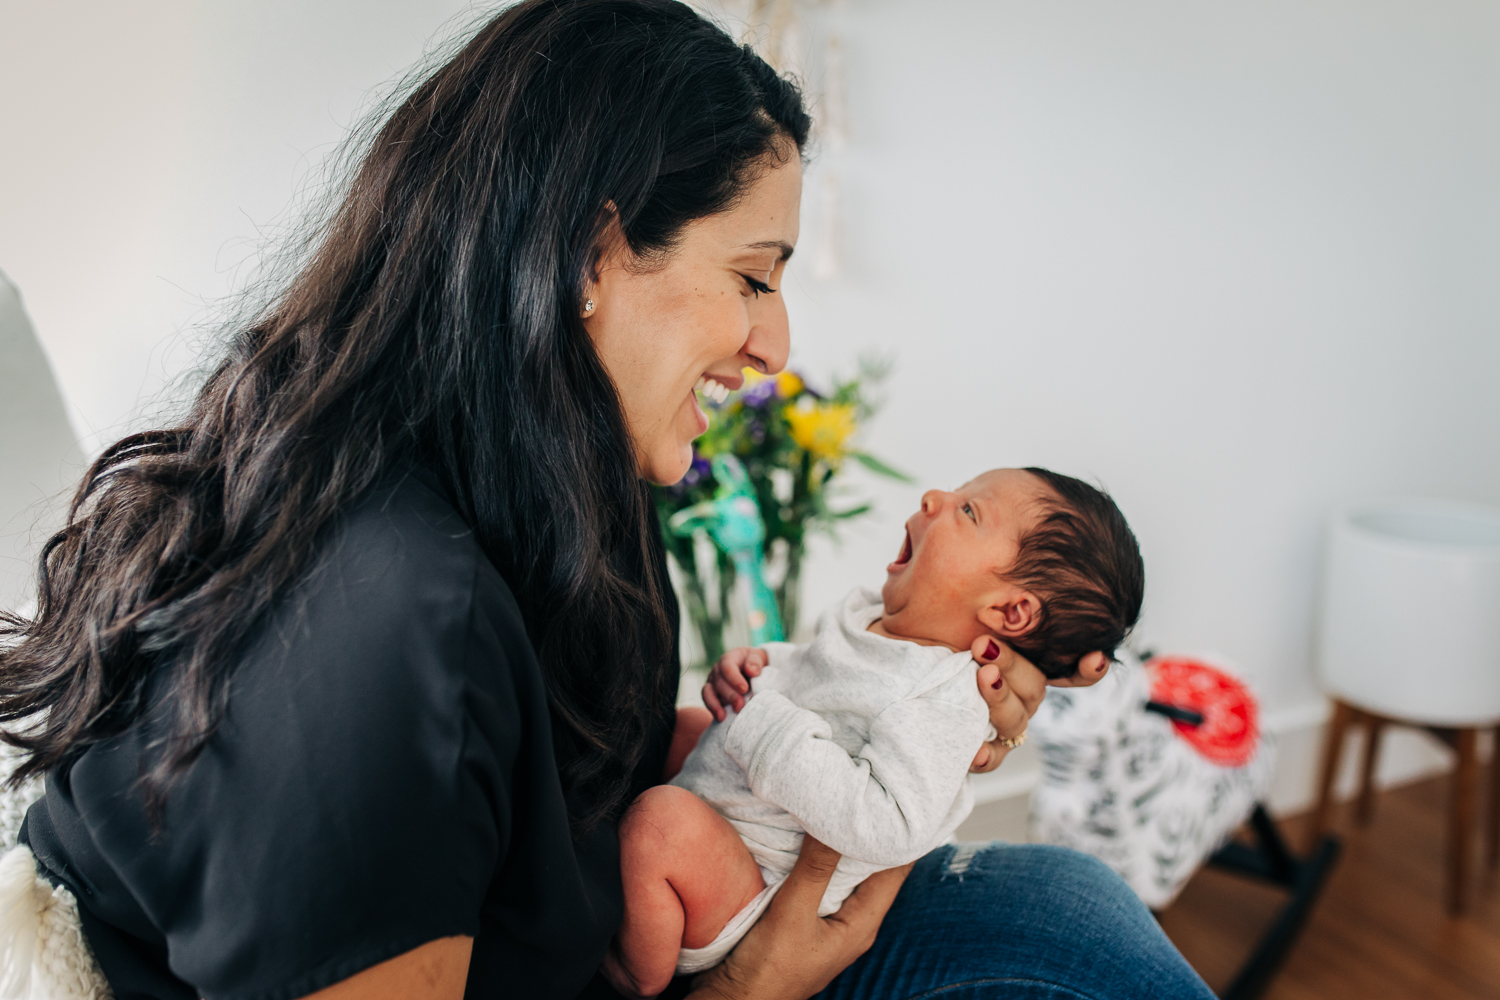 Mom holding her newborn baby close and smiling as they gaze at each other | San Francisco Family Photographer